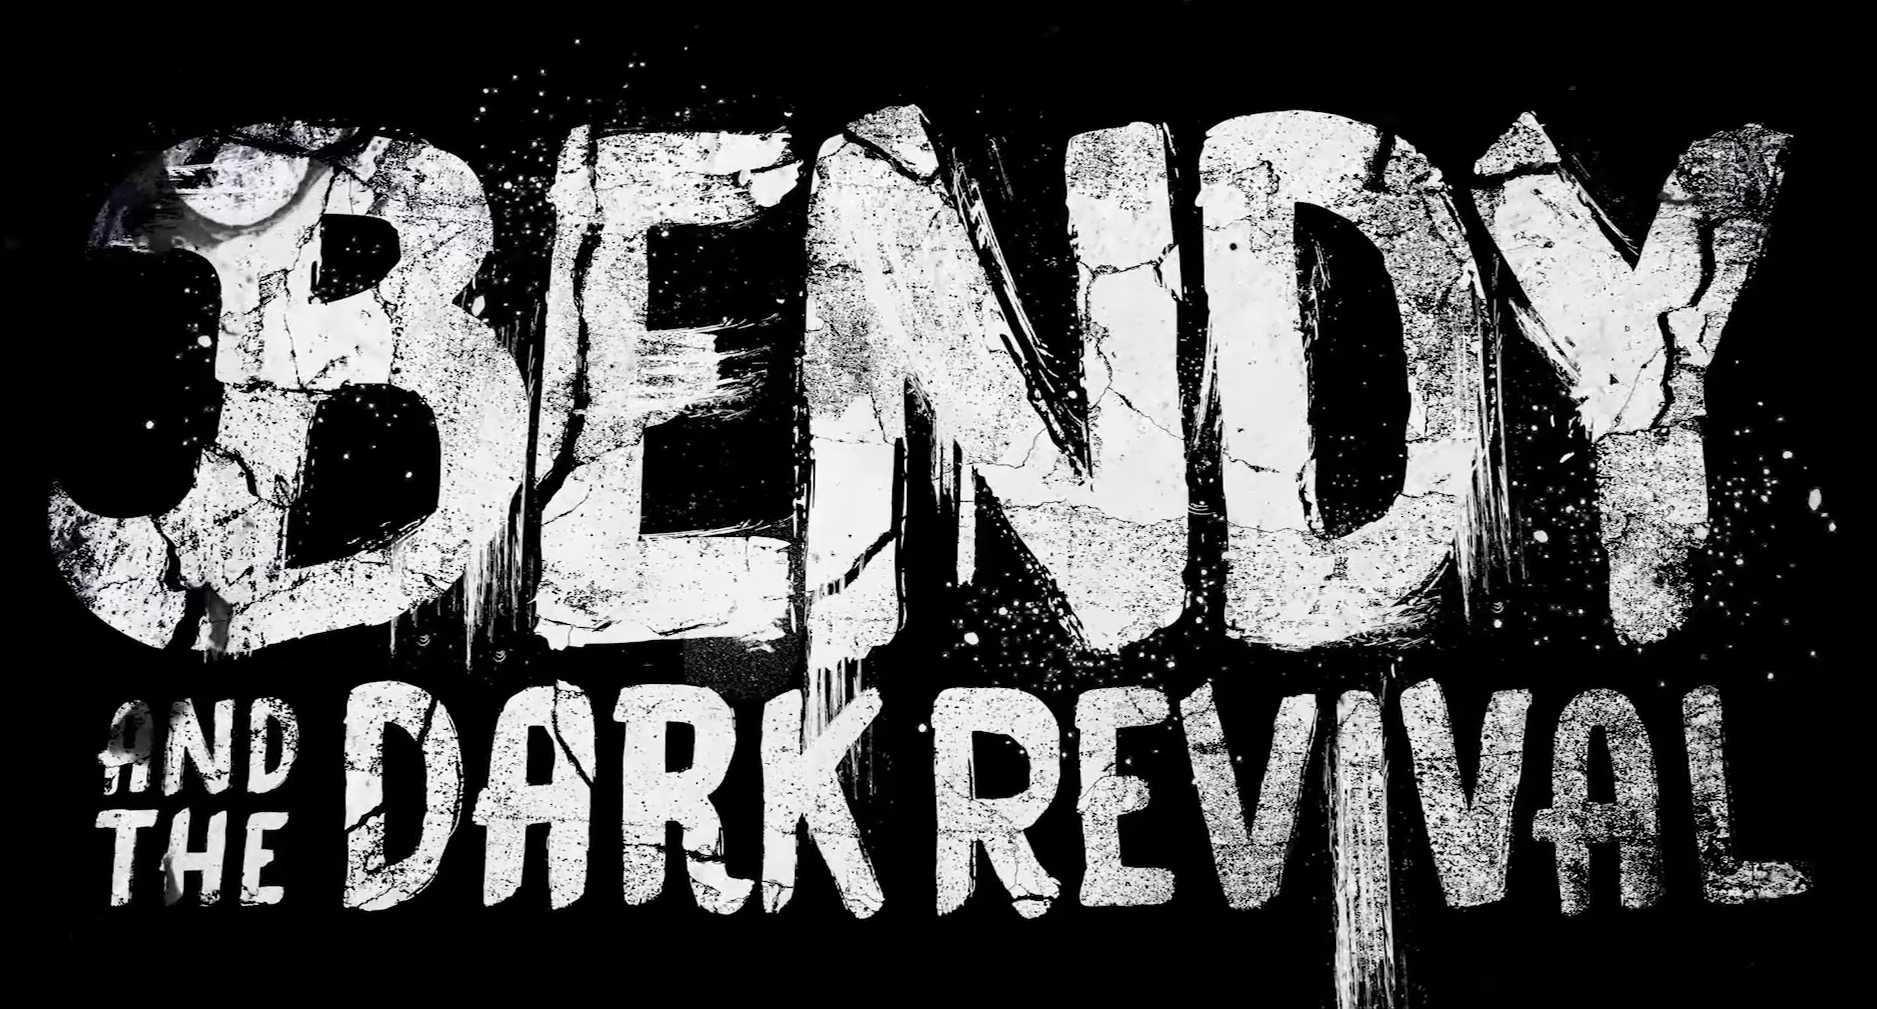 Download Bendy Dark revival For MCPE android on PC